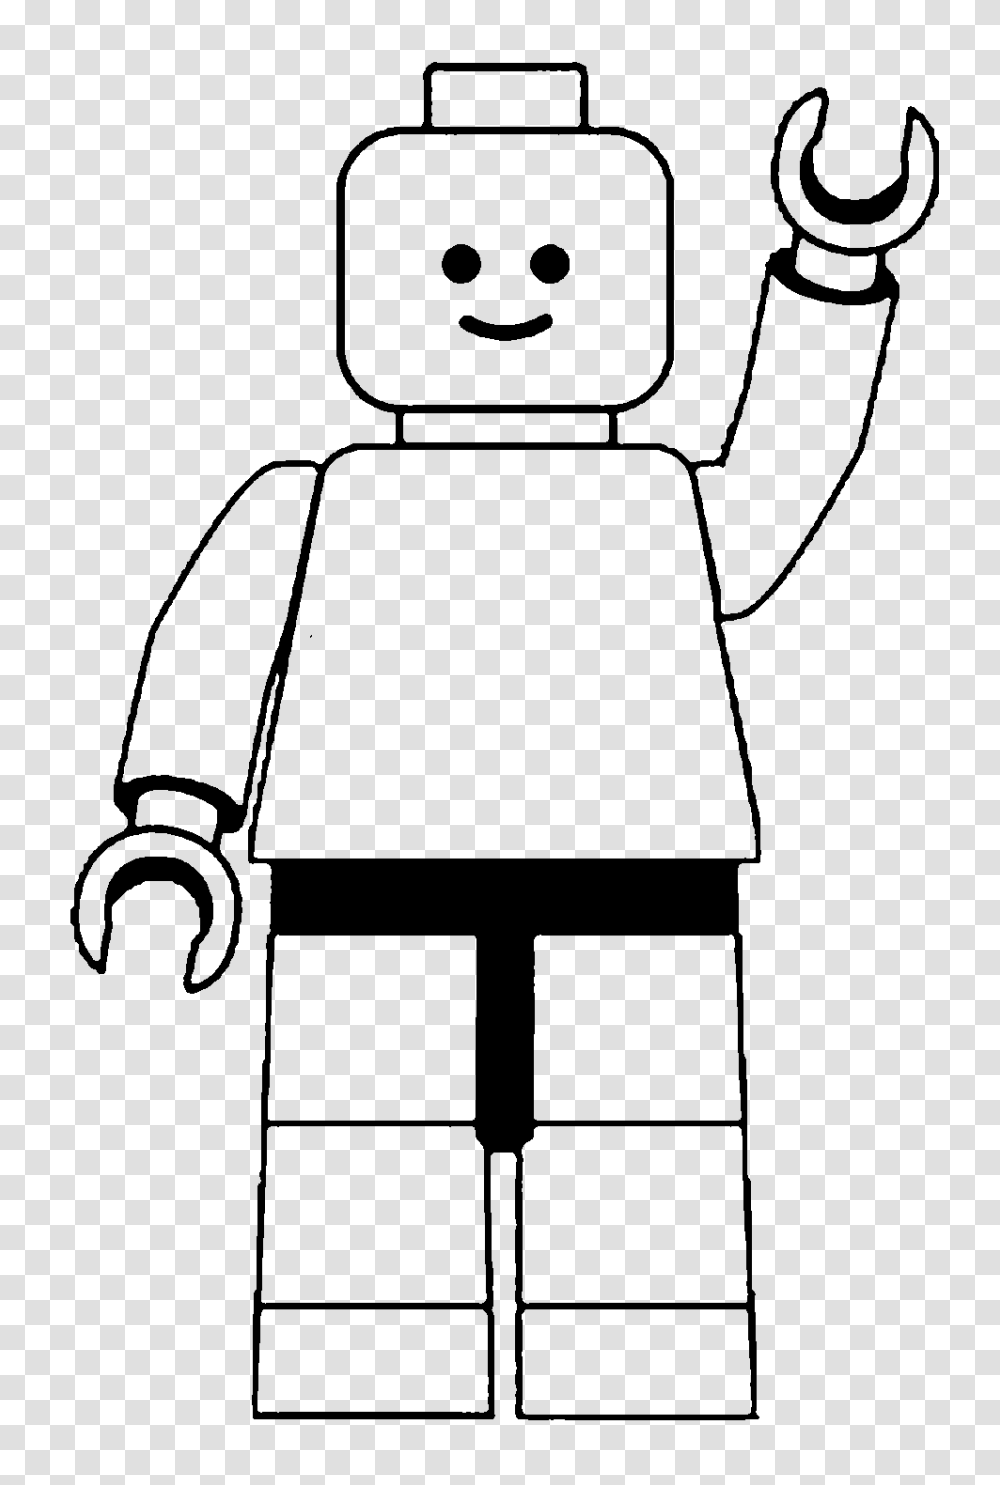 Black And White Lego Clip Art Clipart Collection, Robot, Stencil Transparent Png